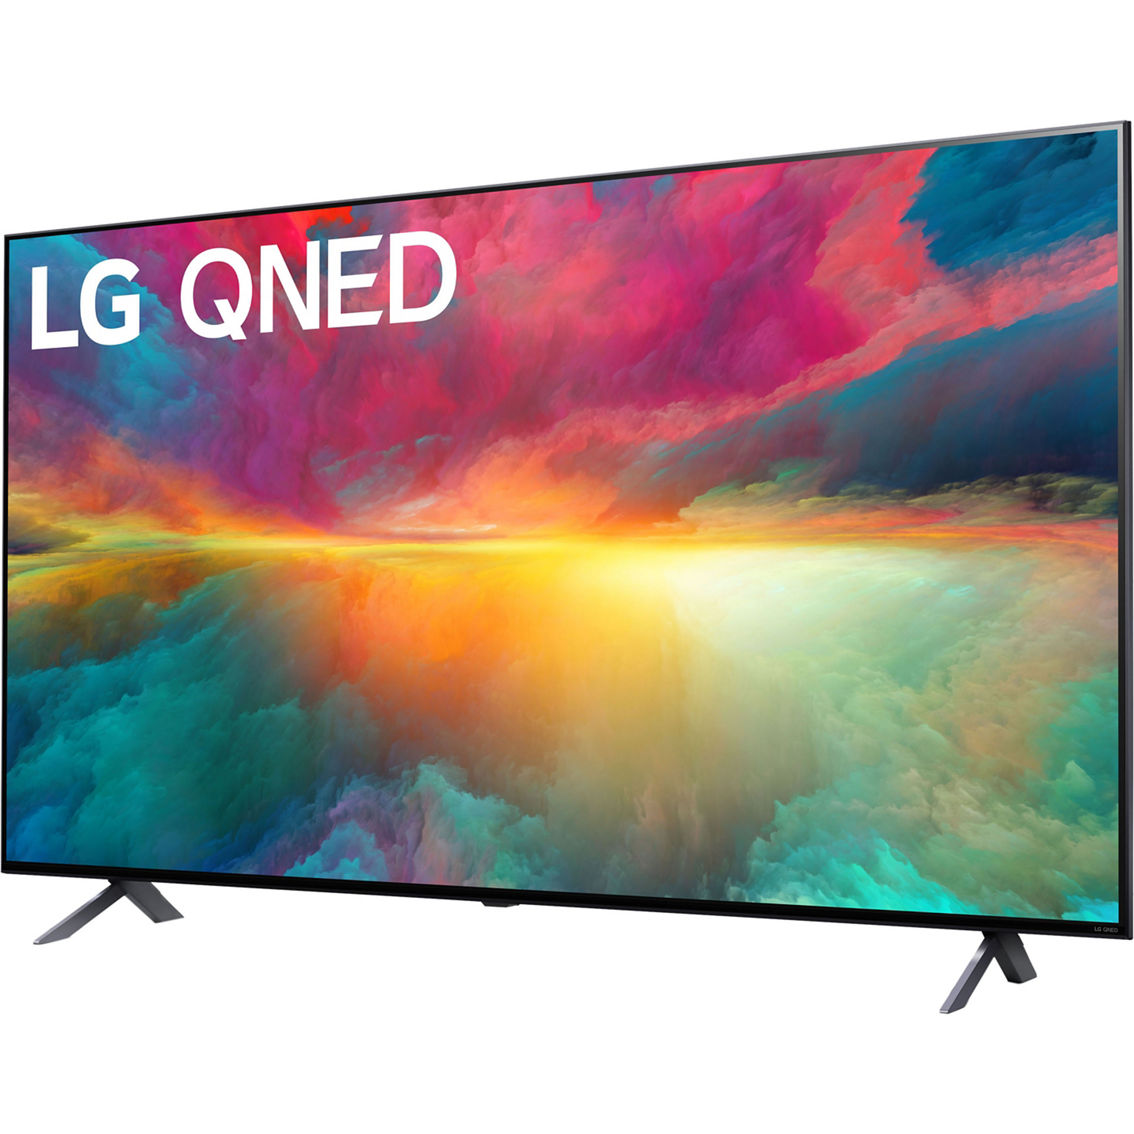 LG 75 in. QNED 4K HDR Smart TV with AI ThinQ 75QNED75URA - Image 4 of 10